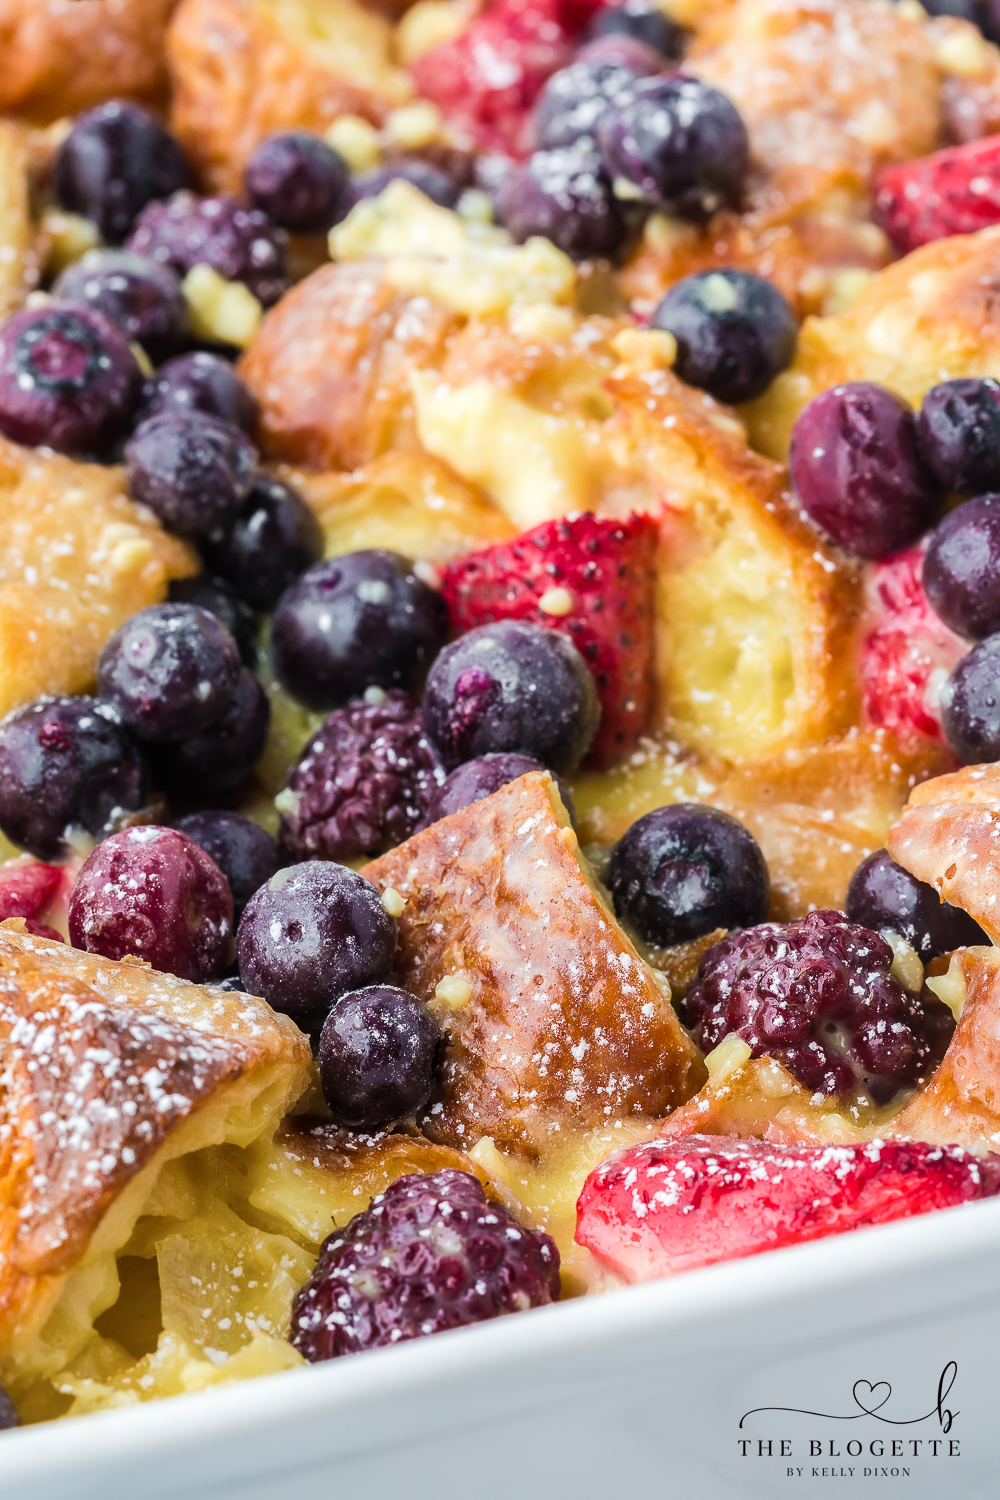 Make-ahead Berry Croissant Bake recipe is perfect for a weekend brunch or special occasion breakfast.